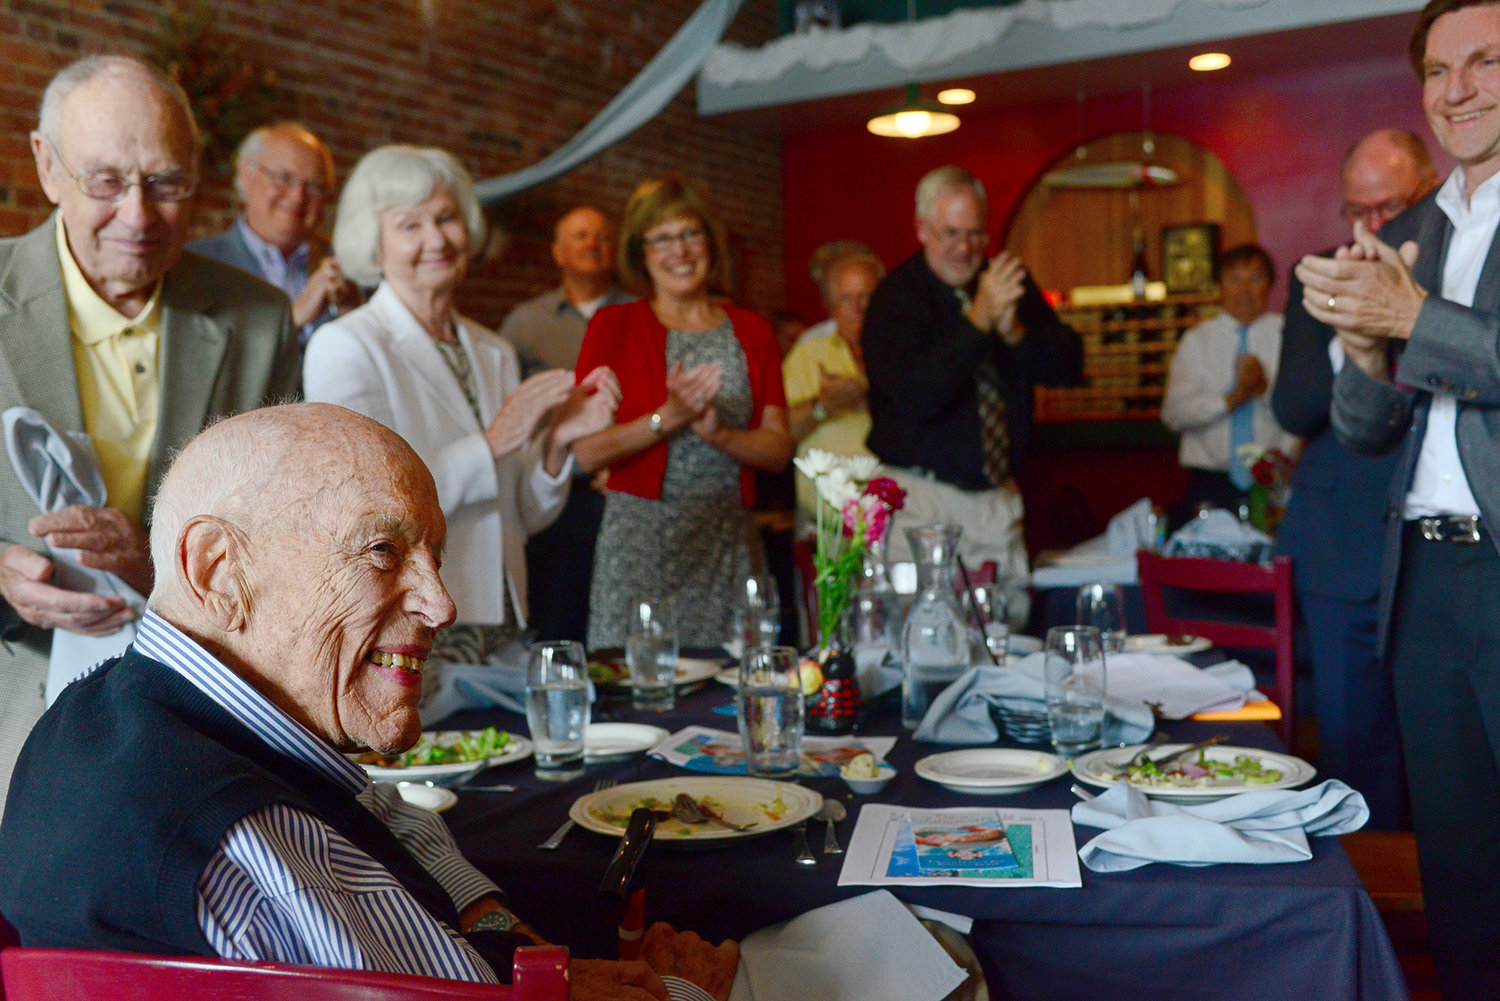 Gail Shaw receives a standing ovation from the crowd at the Chehalis Foundation luncheon on Friday afternoon at Mackinaw's in Chehalis. On Friday it was announced that the new Chehalis aquatic center at Recreation Park will be named after Shaw, and his wife, Carolyn.